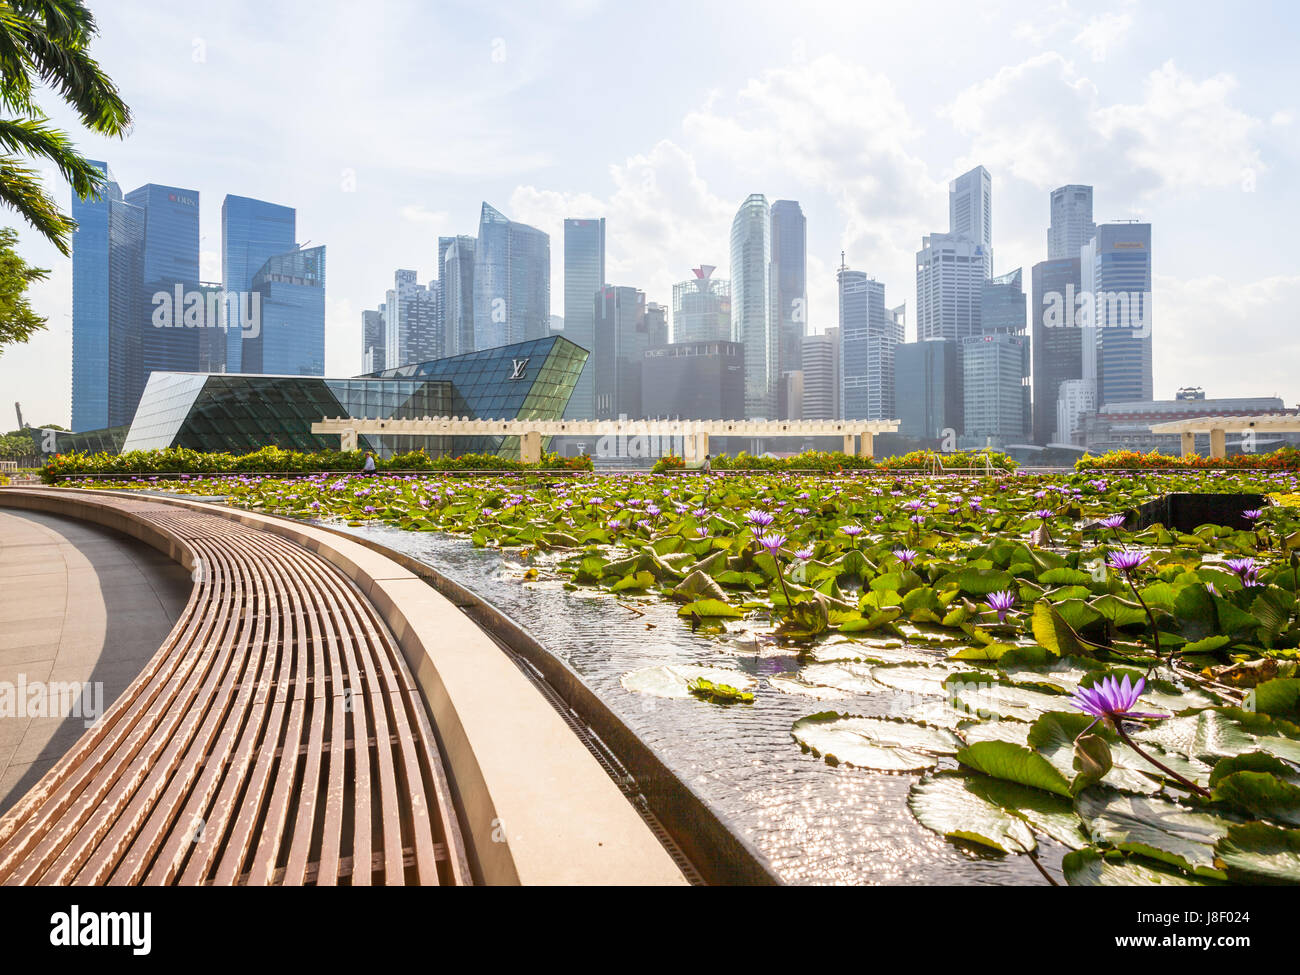 Singapore, Singapore - February 17, 2016: Daytime view of the Singapore CBD skyskrapers with beautiful lilly pond on the foreground. Stock Photo